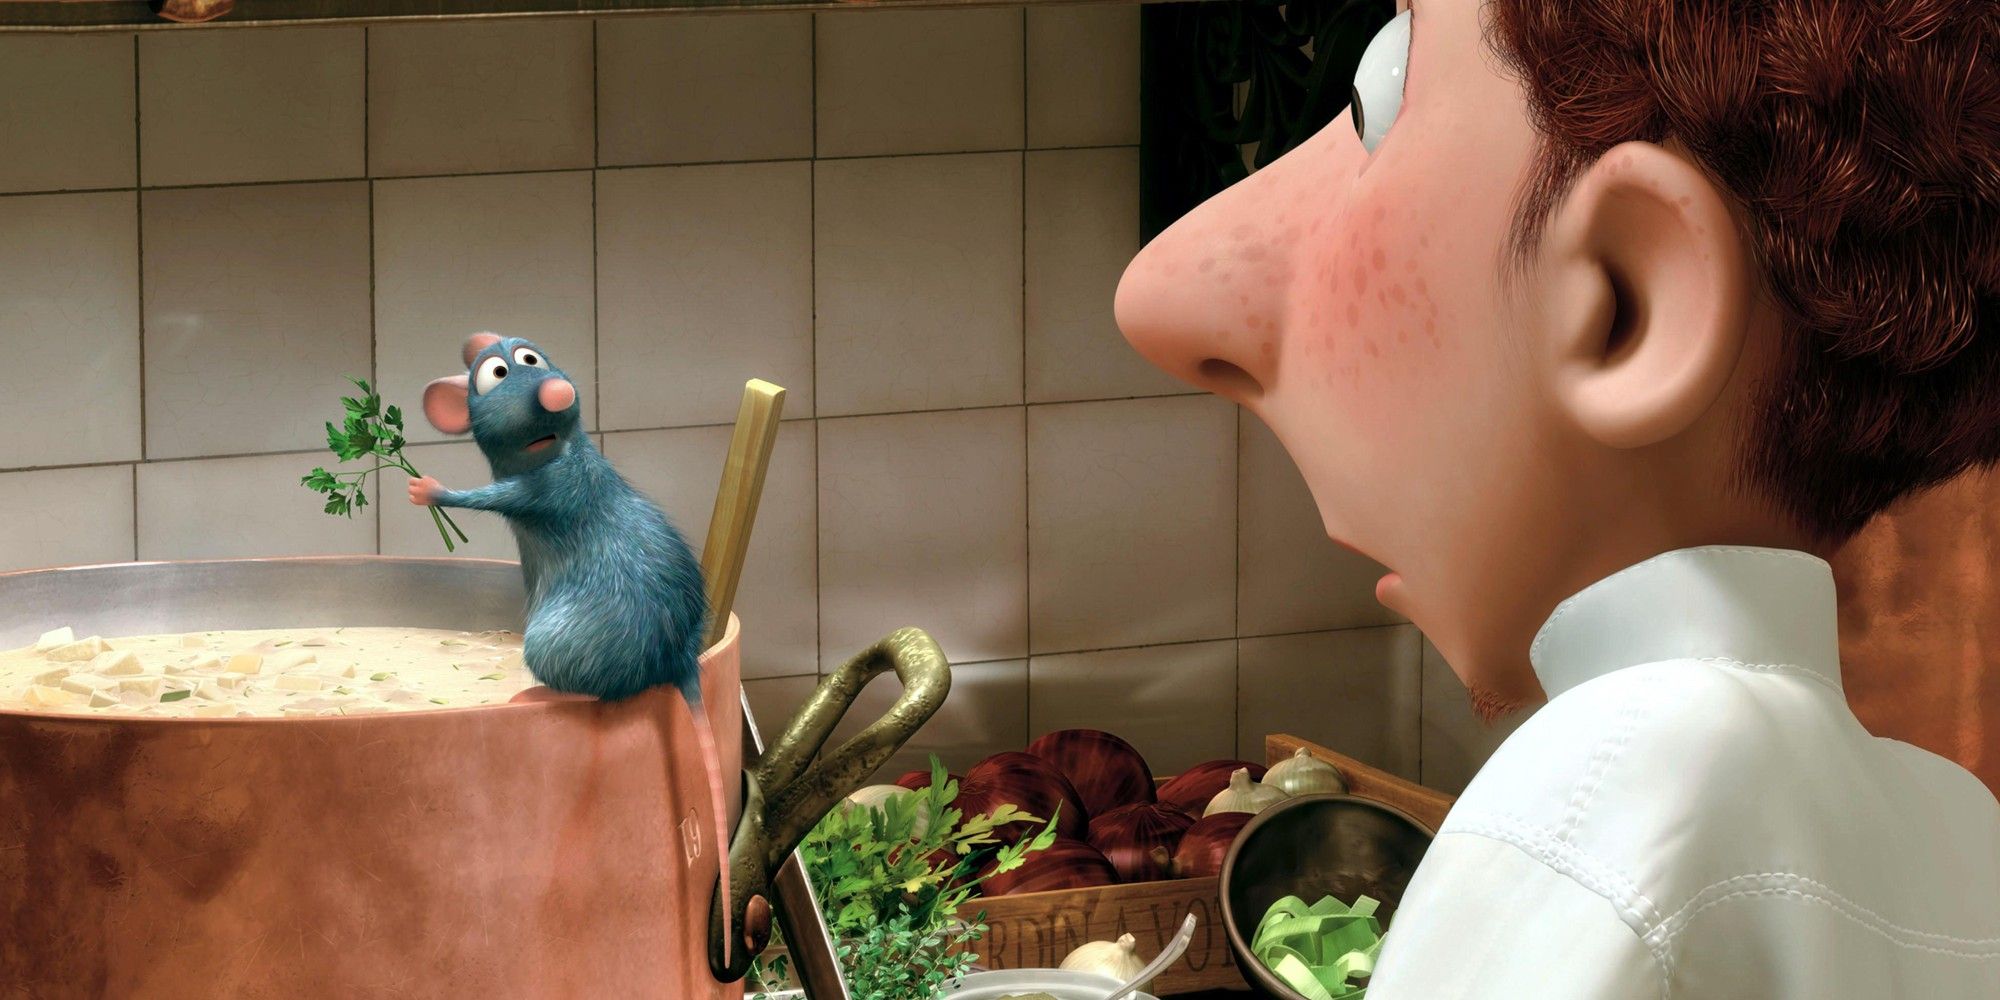 Remy cooking in Ratatouille